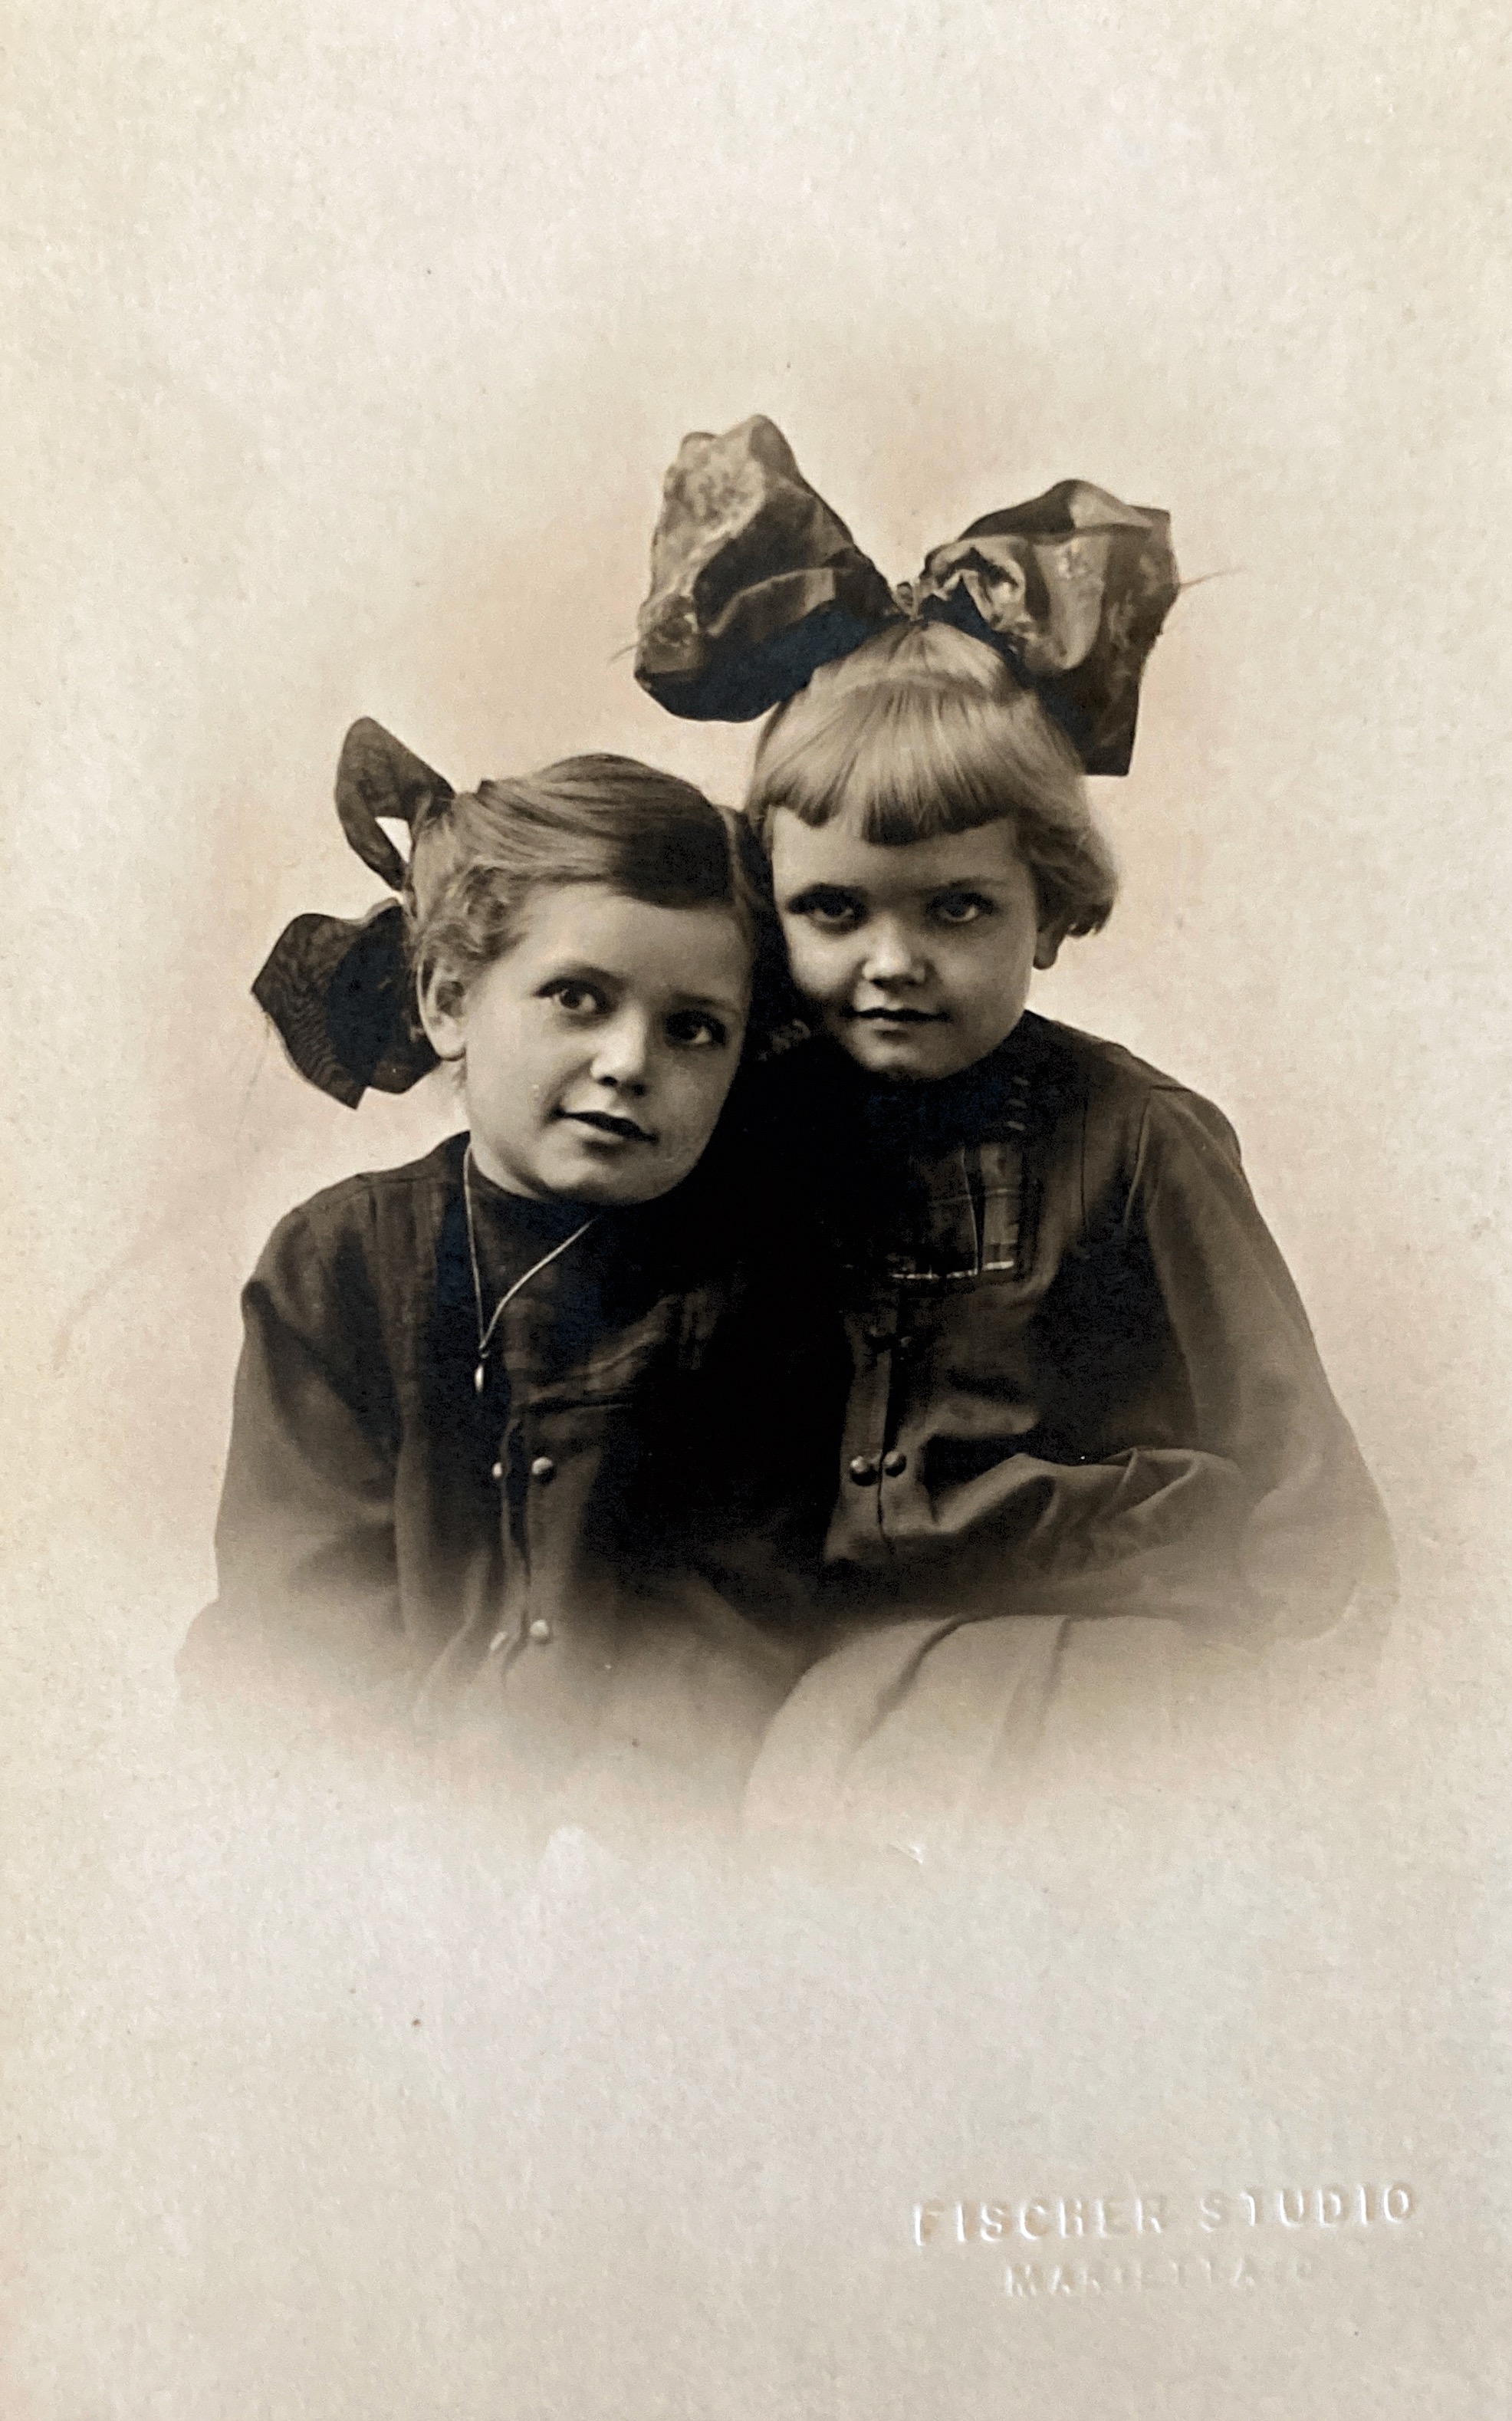 Clarice (8 yrs) and Mildred (6 yrs)
1916